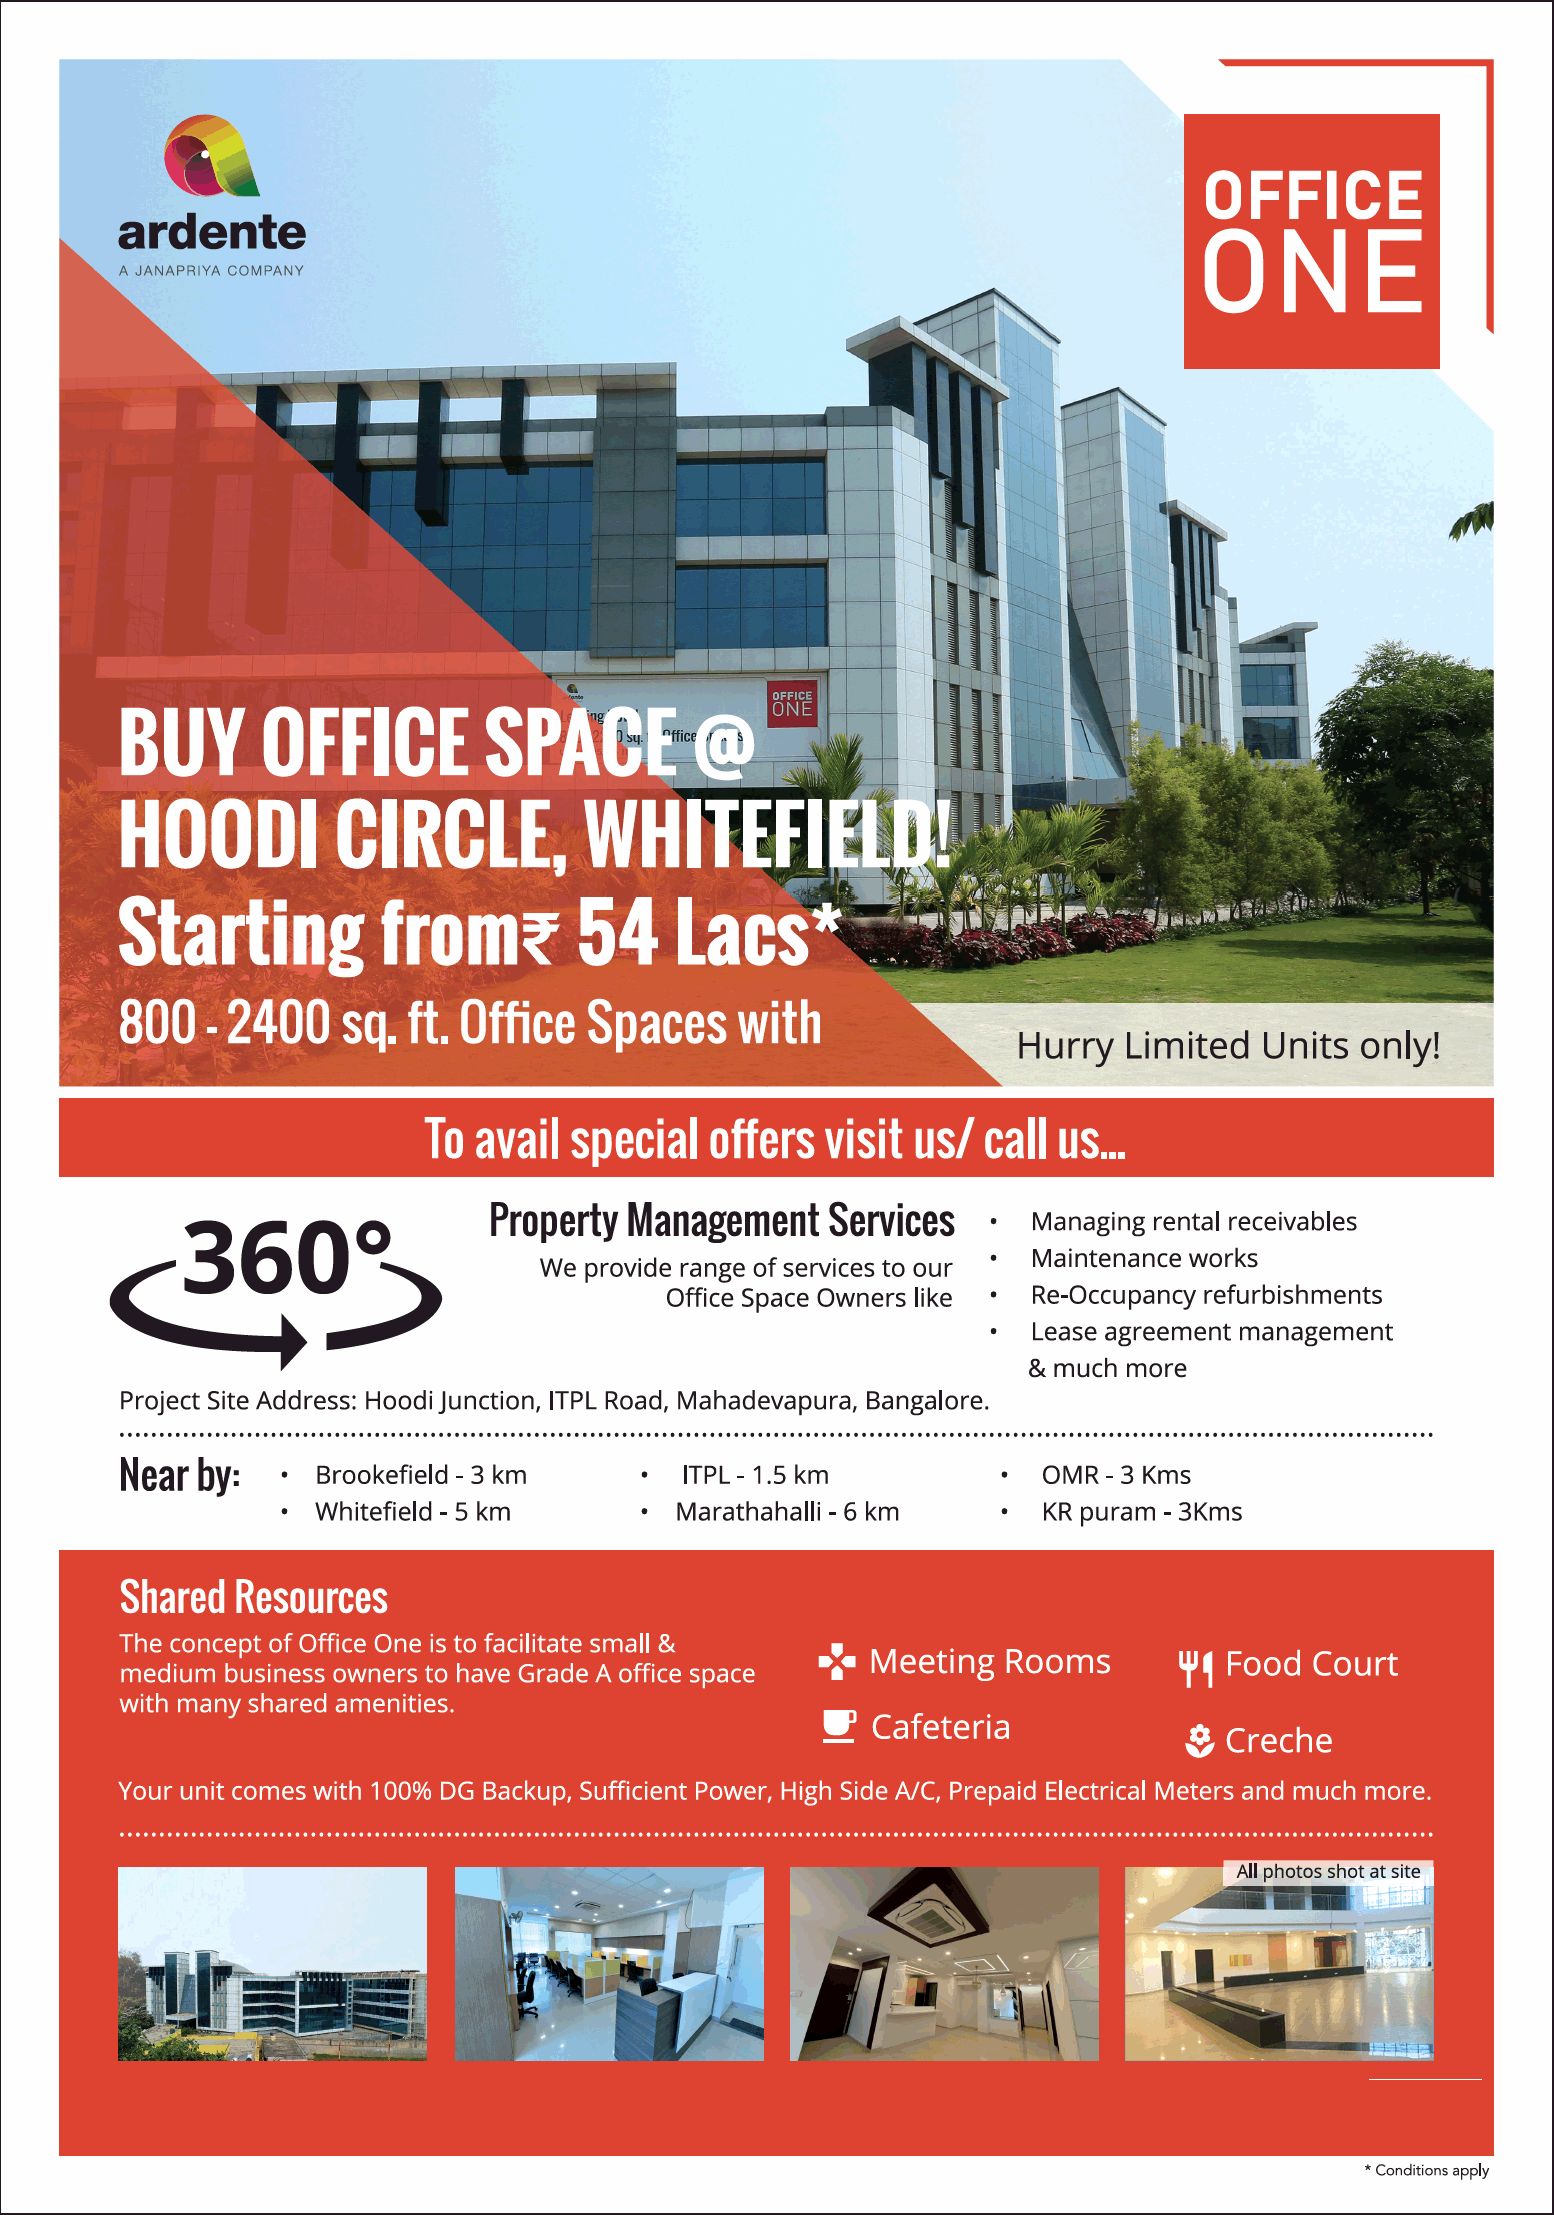 Buy office space in Hoodi Circle, Whitfield starting from Rs 54 lacs at  Ardente Office One in Bangalore Update